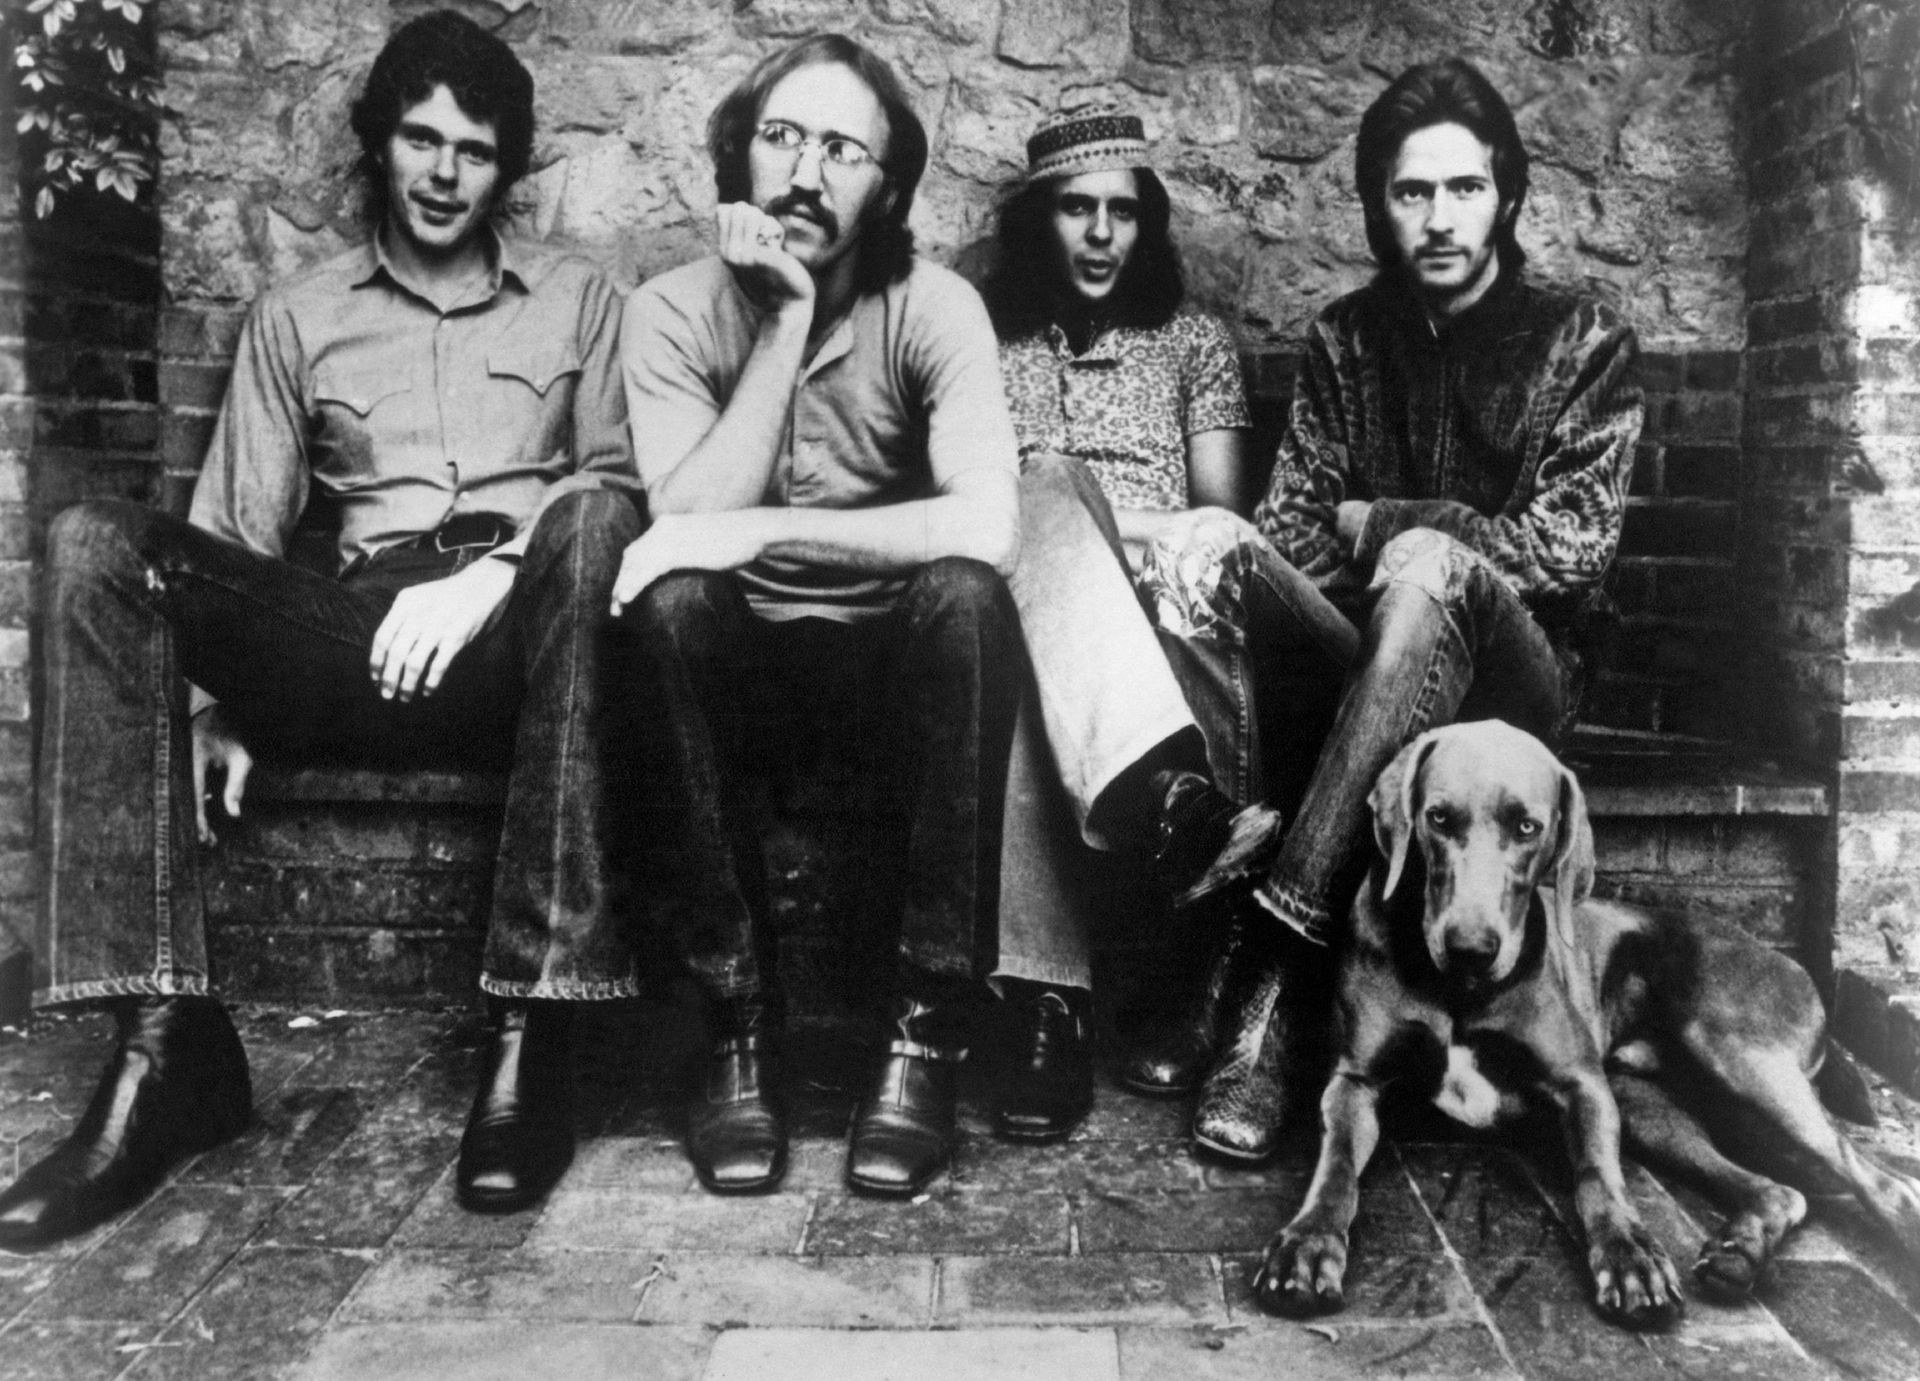 Les 50 ans de "Layla and Other Assorted Love Songs" de Derek and the Dominos